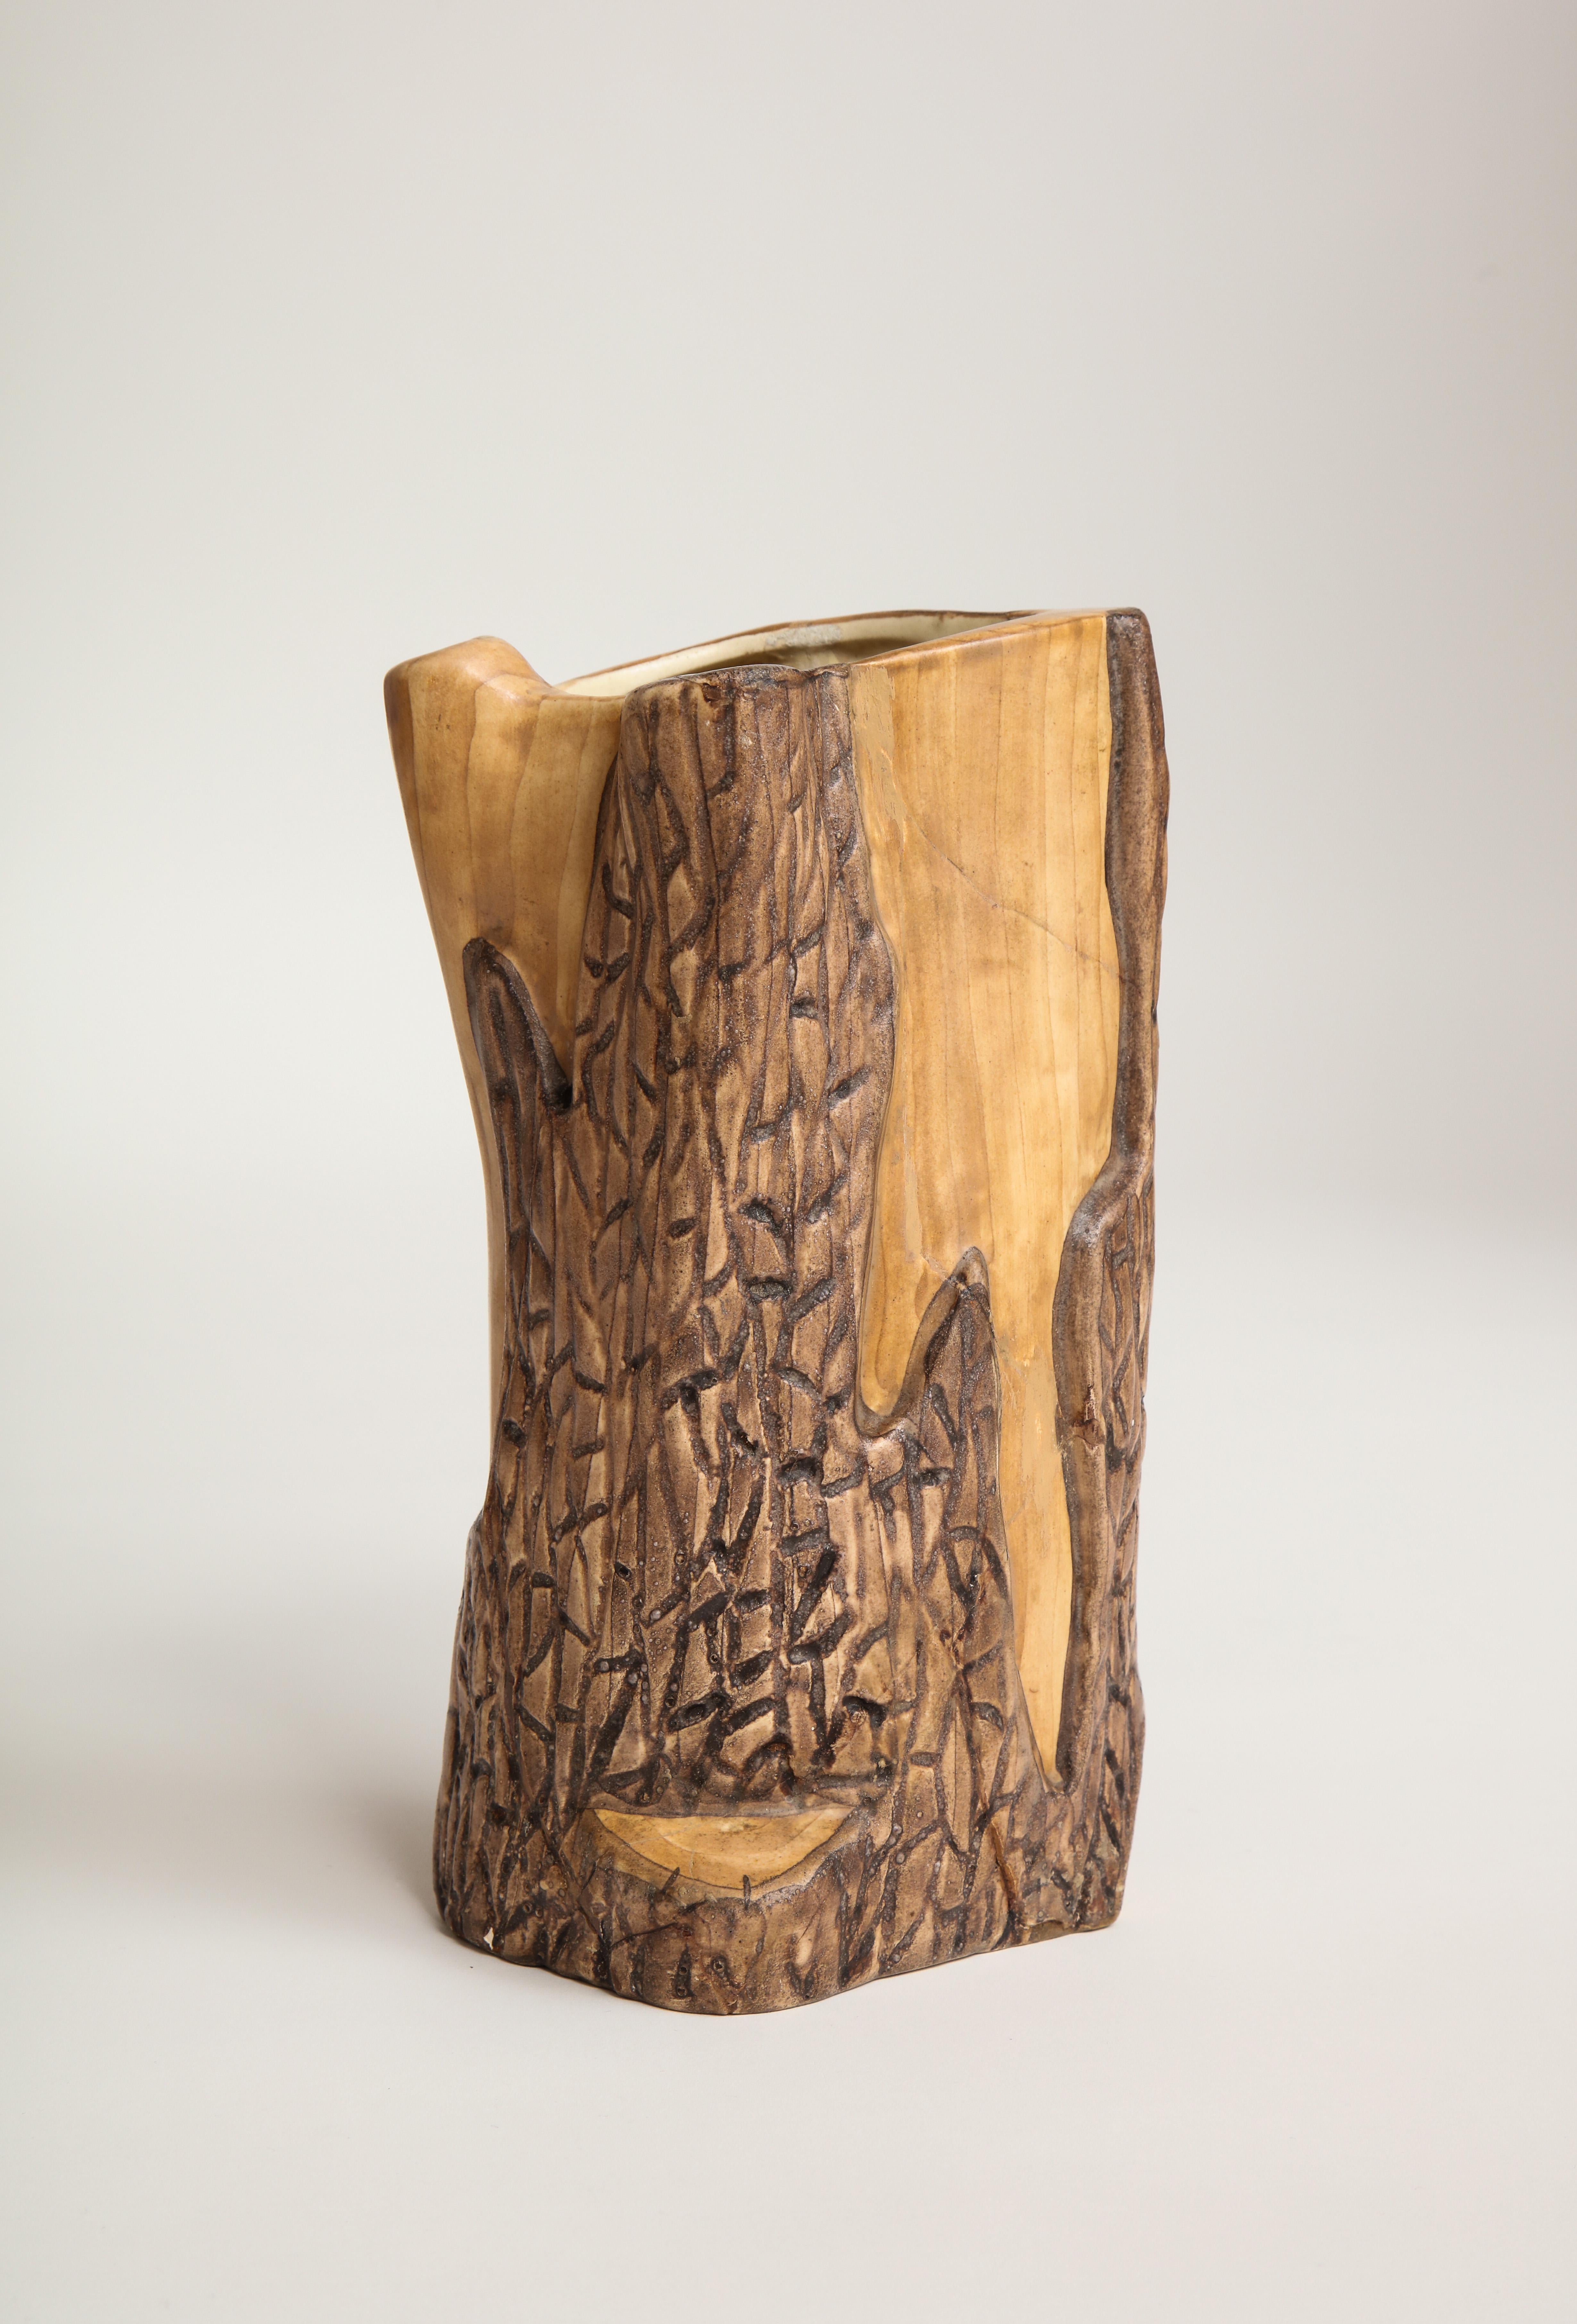 Valorous Faux Bois Vessel by Grandjean Jourdan In Good Condition For Sale In New York, NY